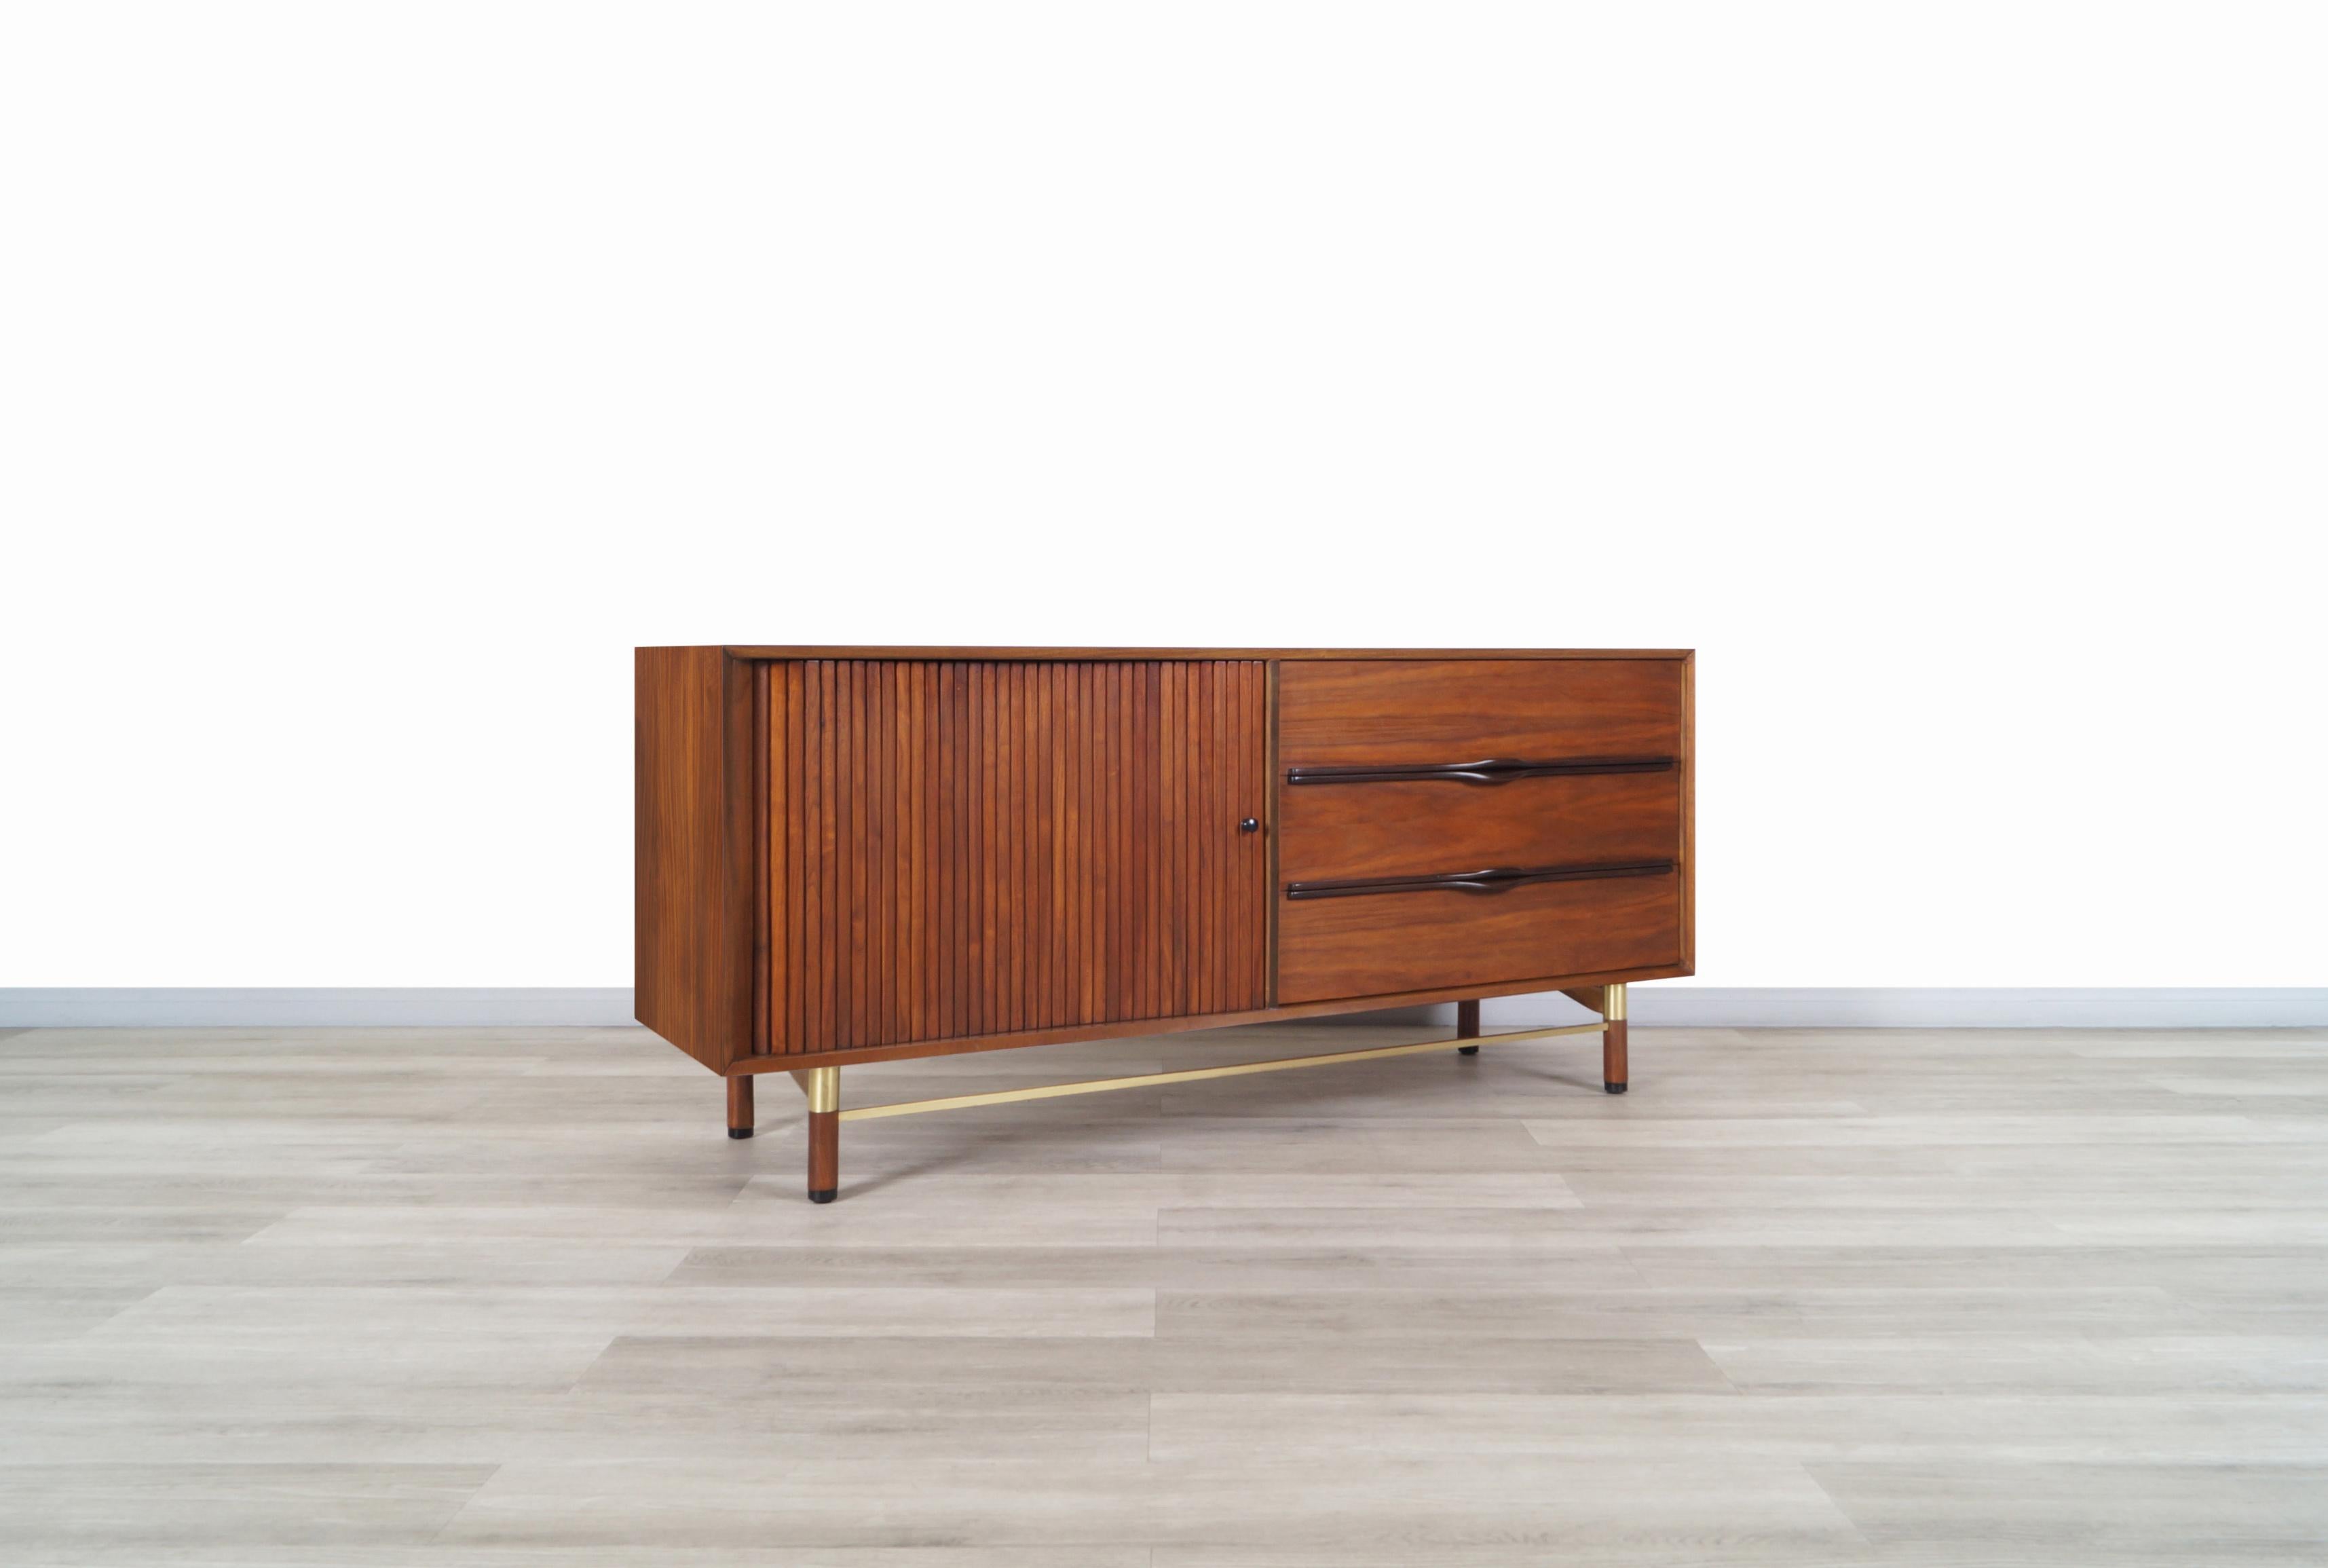 Beautiful mid century walnut and brass credenza / dresser designed and manufactured in the United States, circa 1960s. This dresser has a minimalist design, combined with its materials result in an elegant and functional dresser. On the left side,